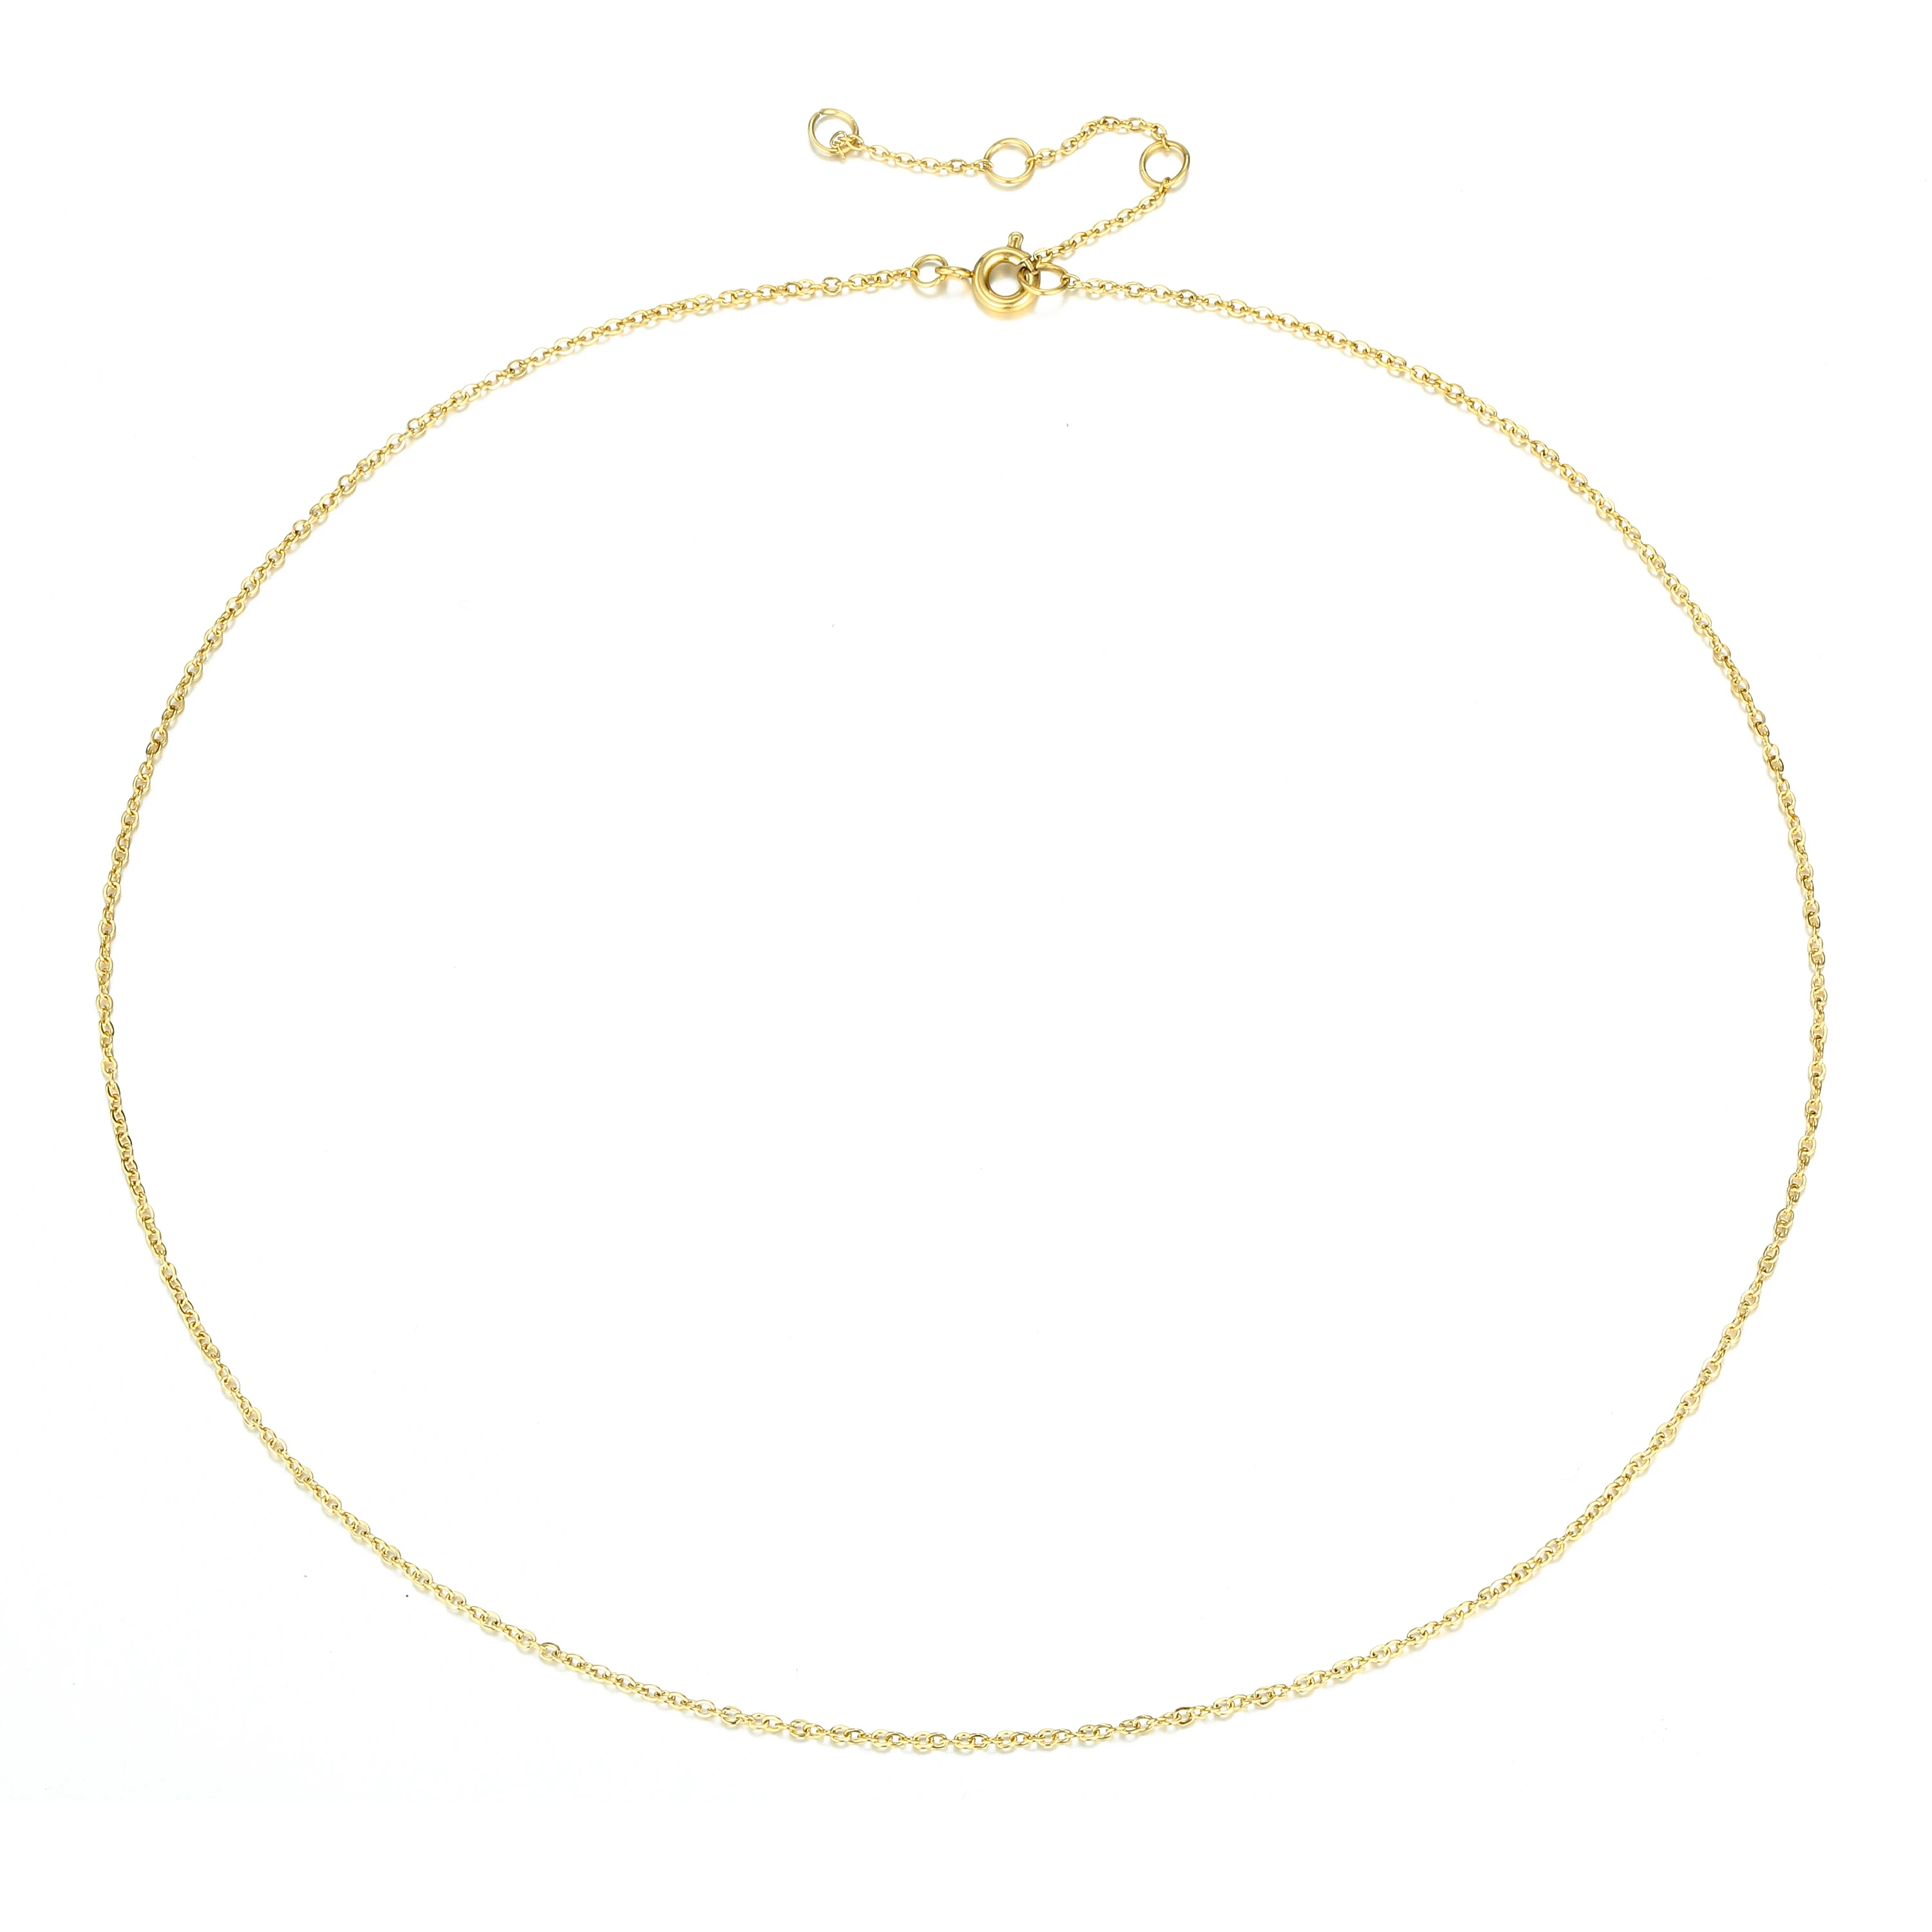 Women Female Fashion Neck Chain Designs Stainless Steel Gold Thin Chain Choker Necklace YX15471